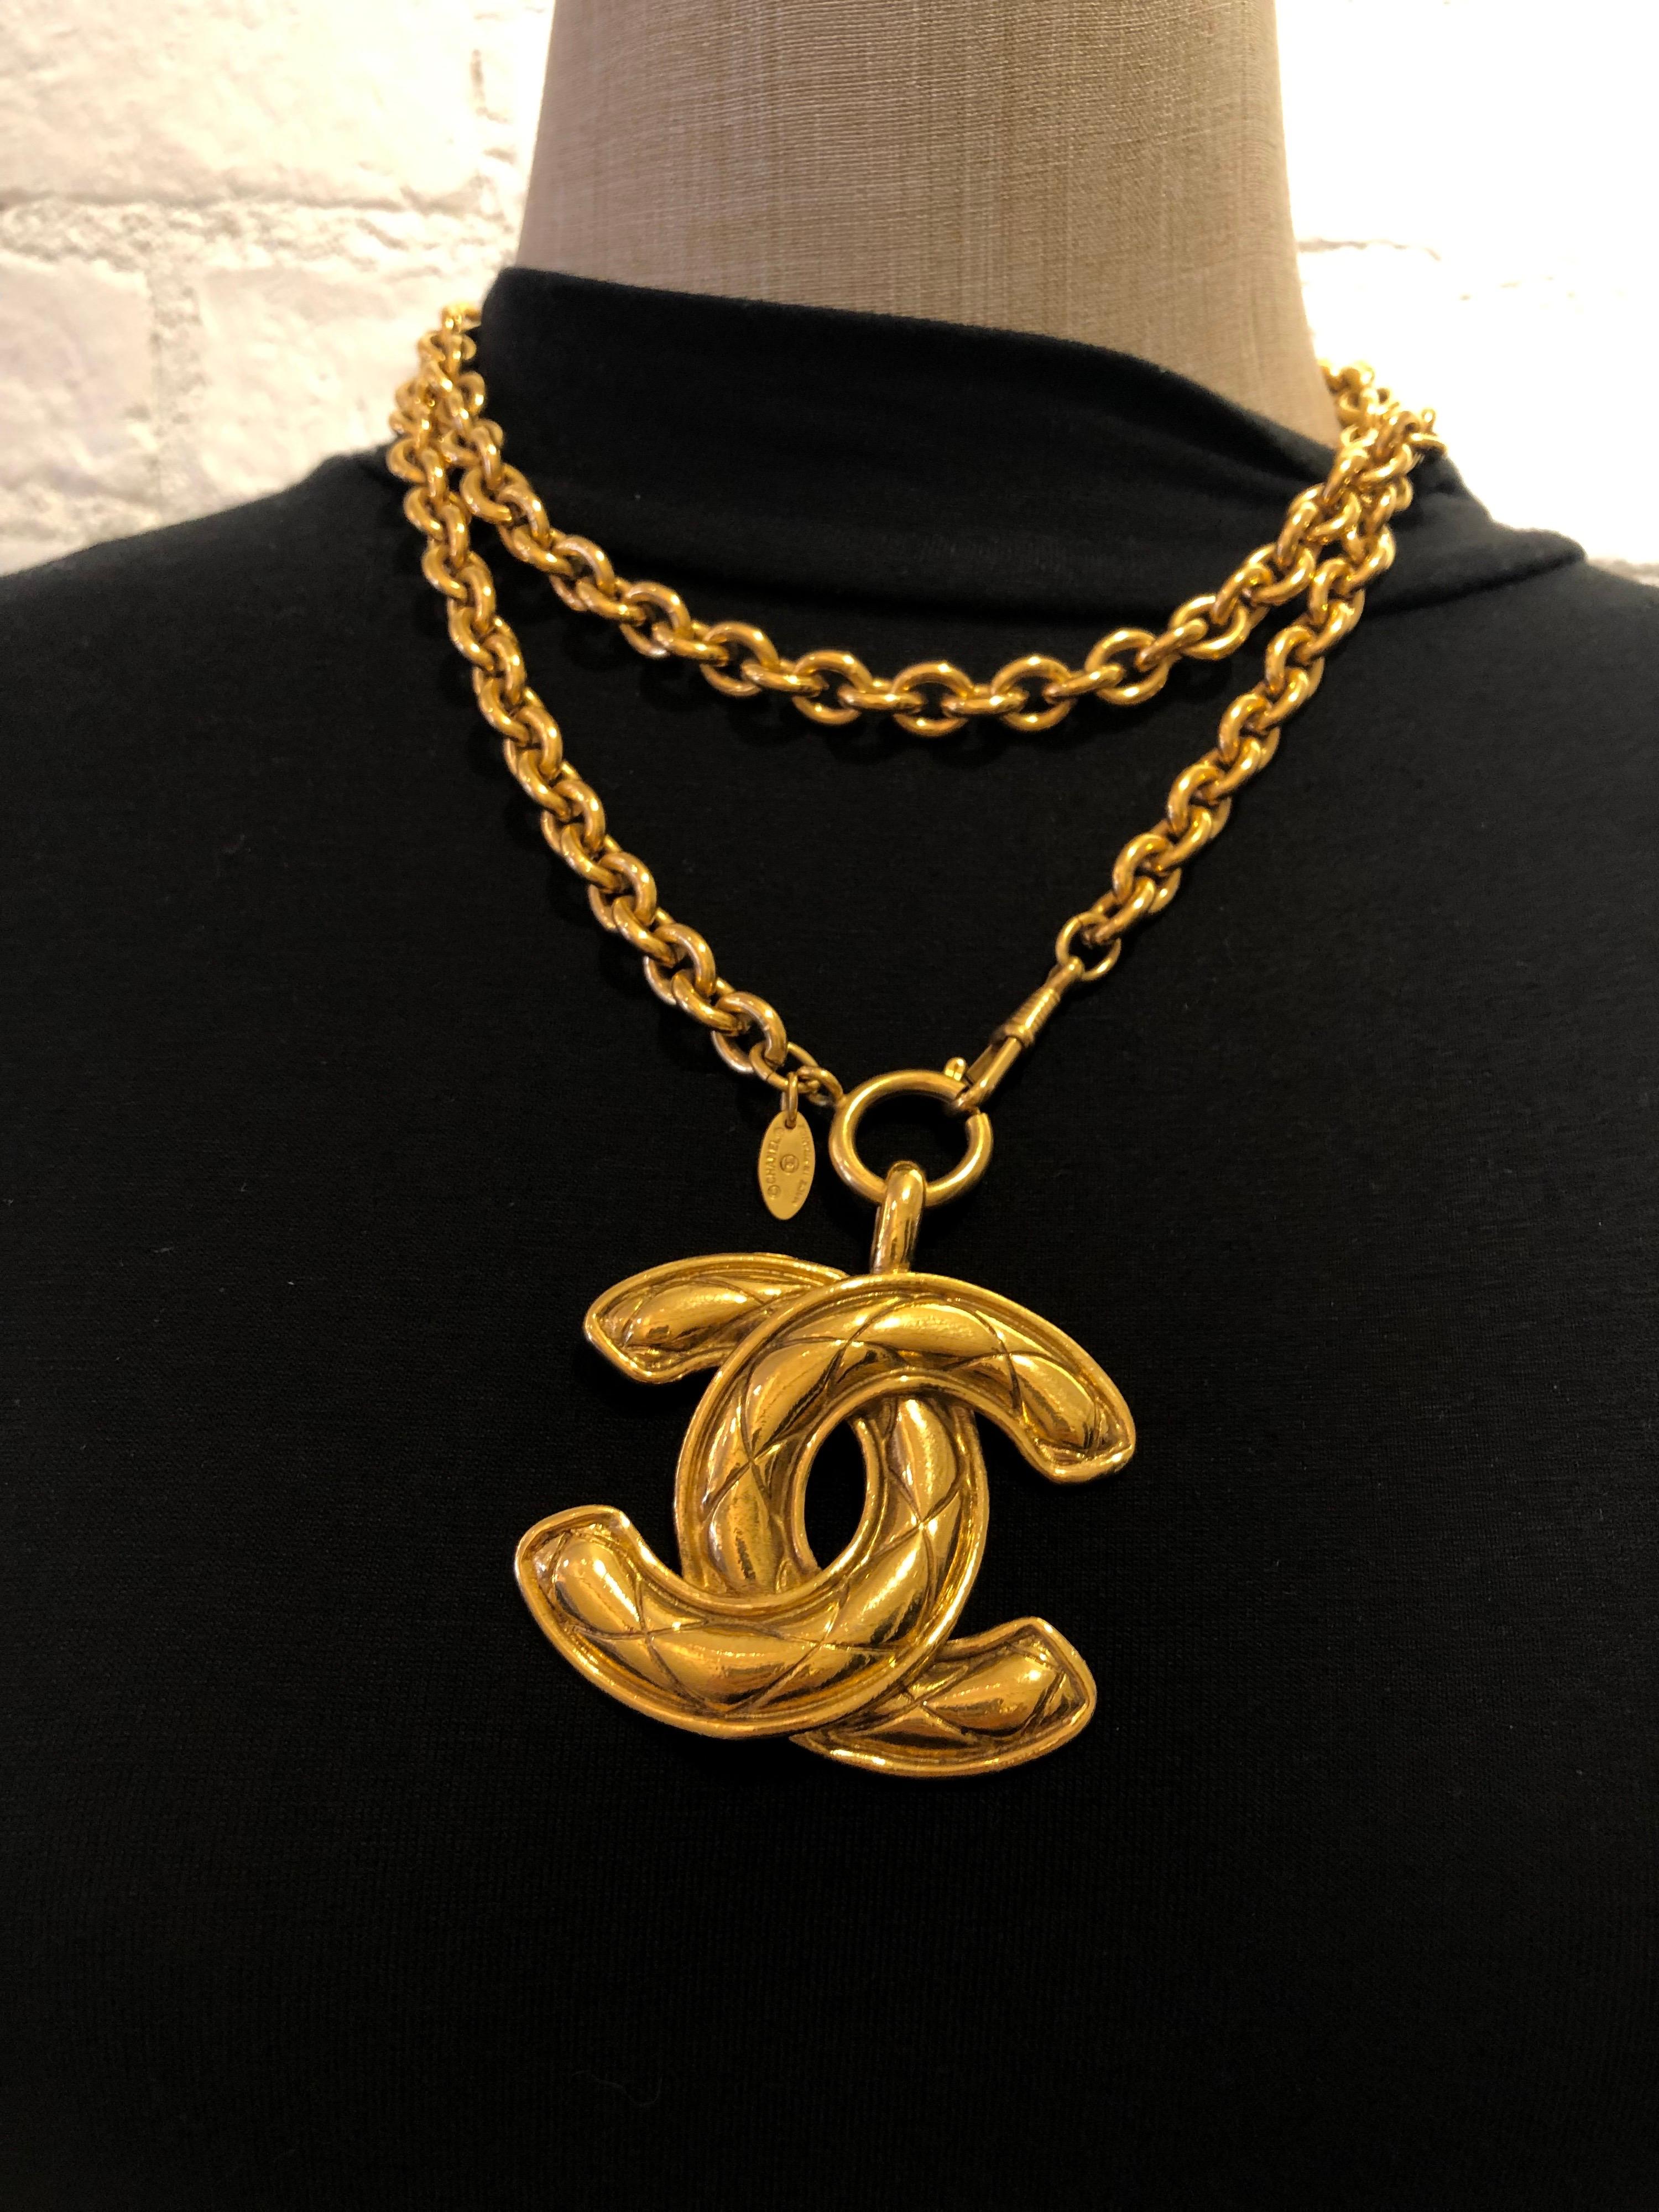 1980s Chanel gold toned chain necklace featuring a huge iconic gold toned Chanel quilted CC charm. The largest of the quilted CC series. It can be worn single chained as a long necklace or double chained as a short necklace. Stamped CHANEL made in